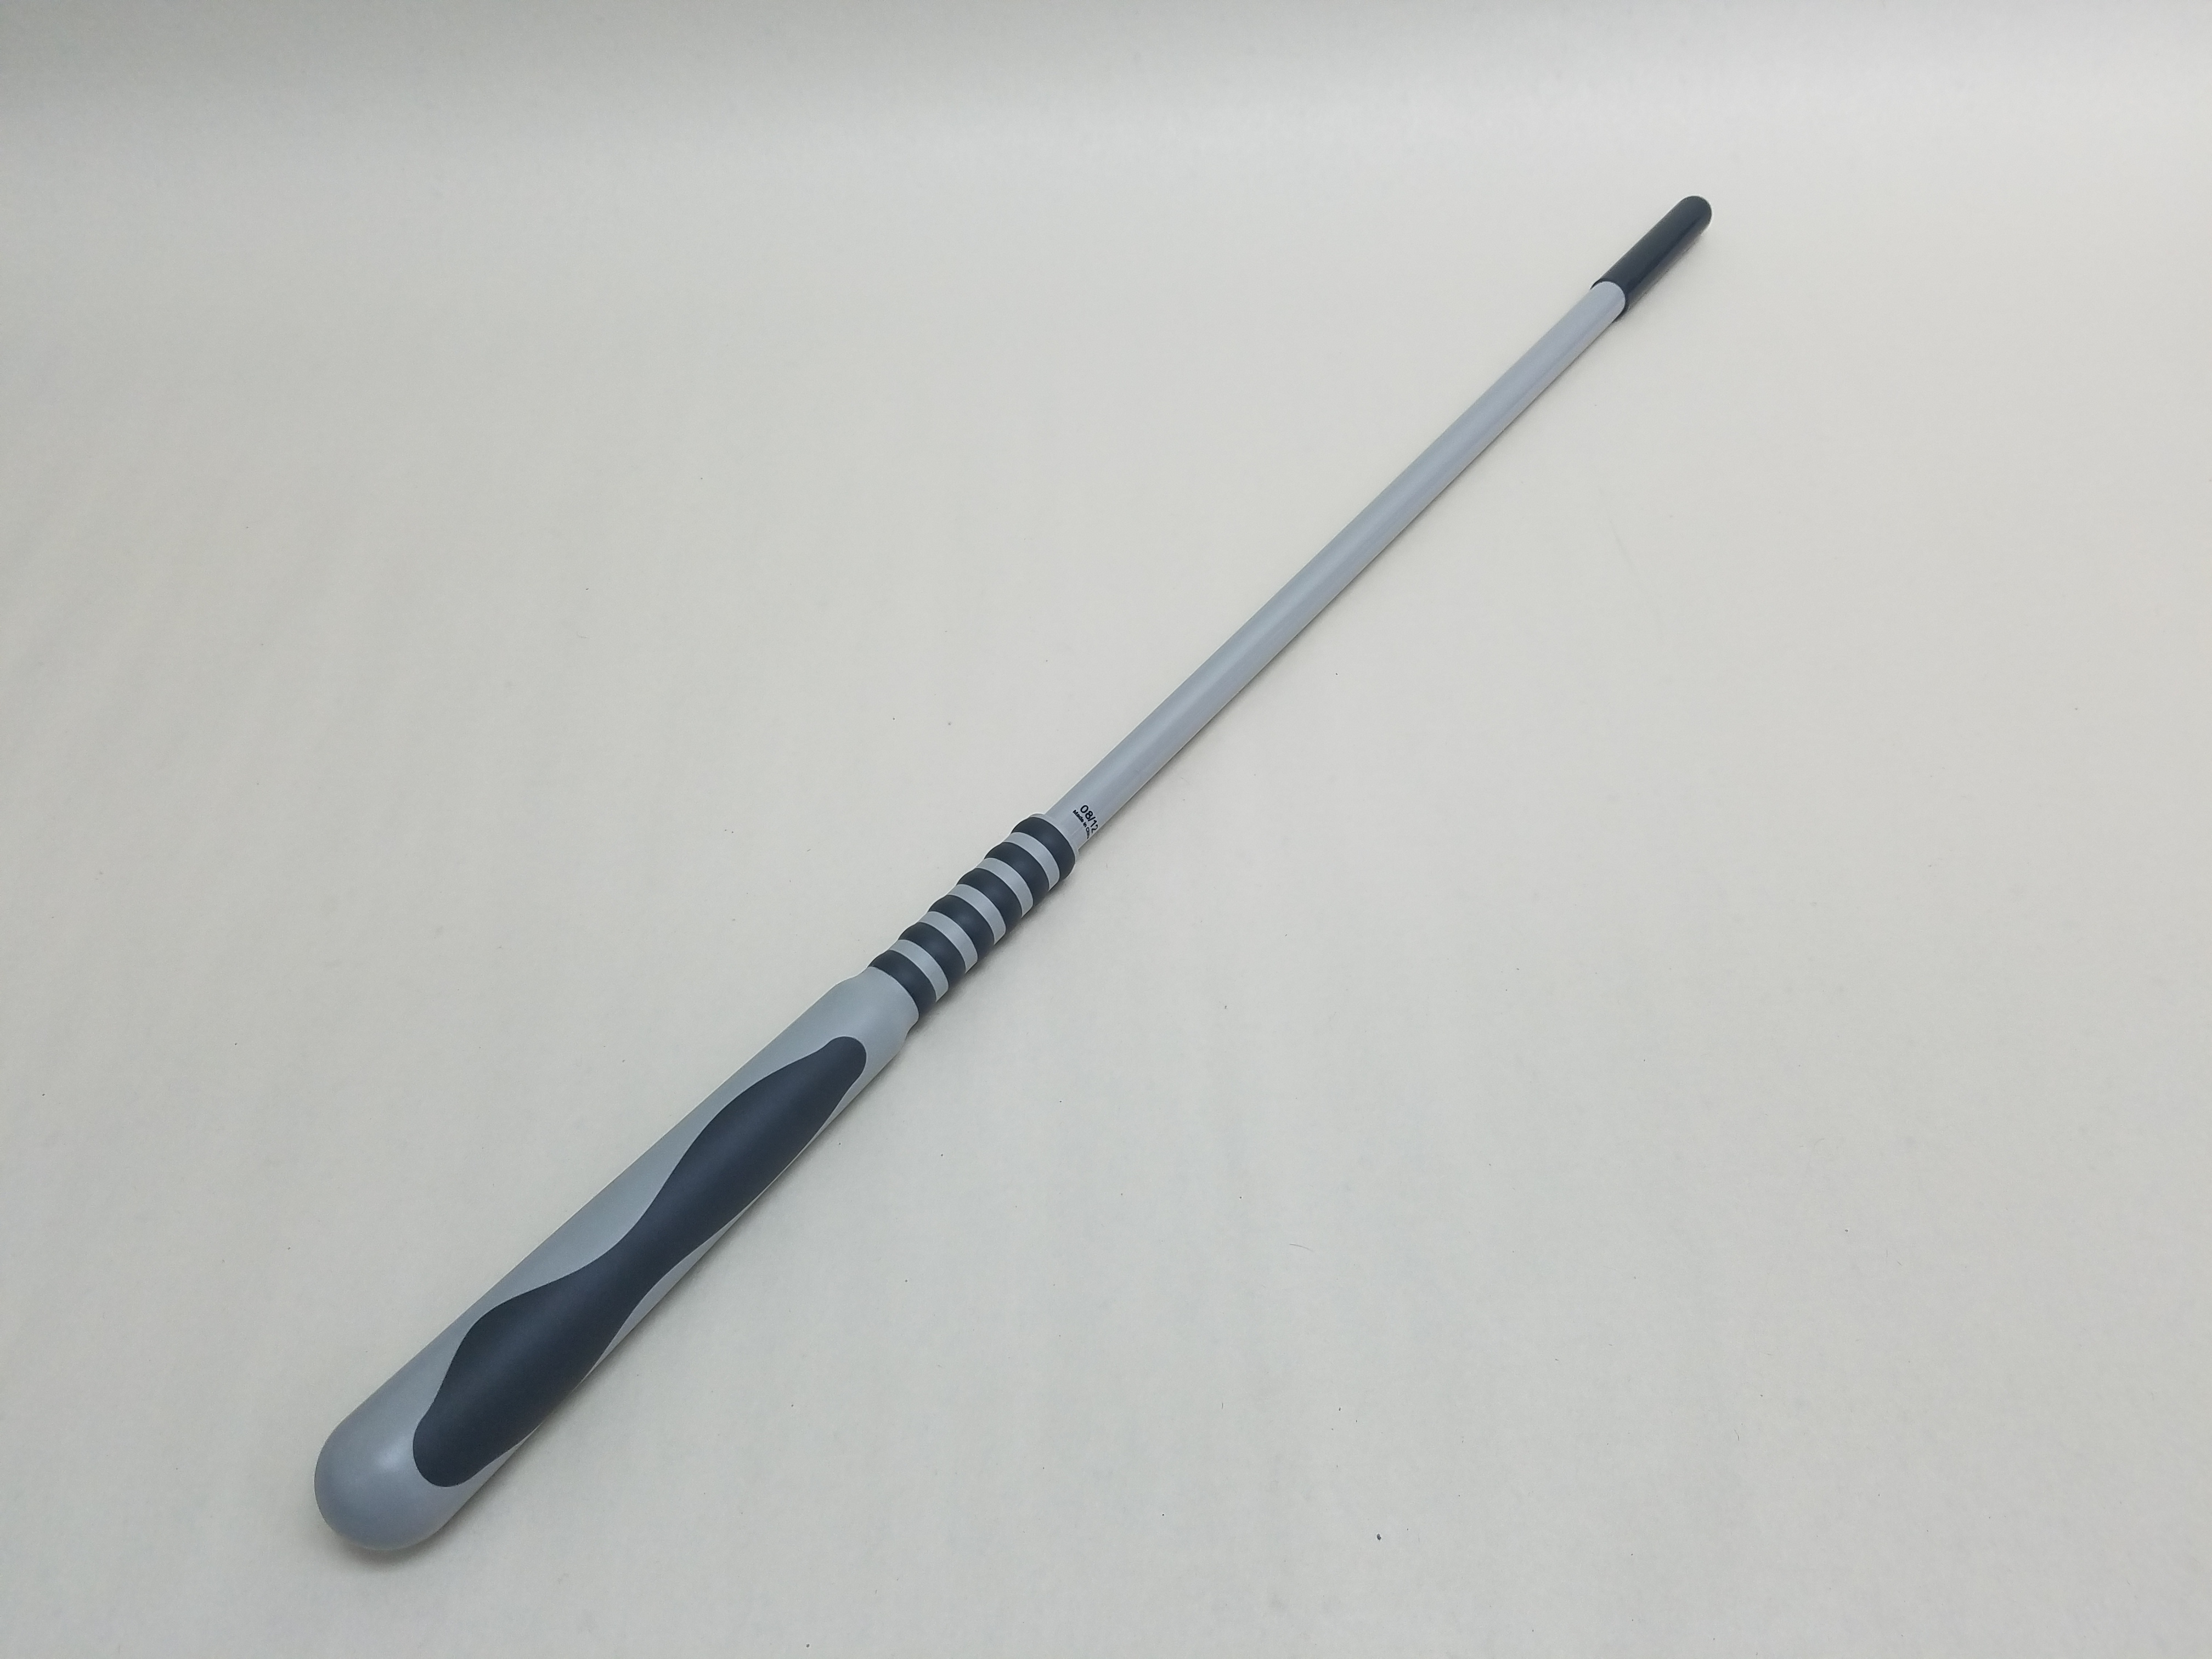 Used New Promethean ActivWand 50 Cordless Extended Reach Pen - image 2 of 4